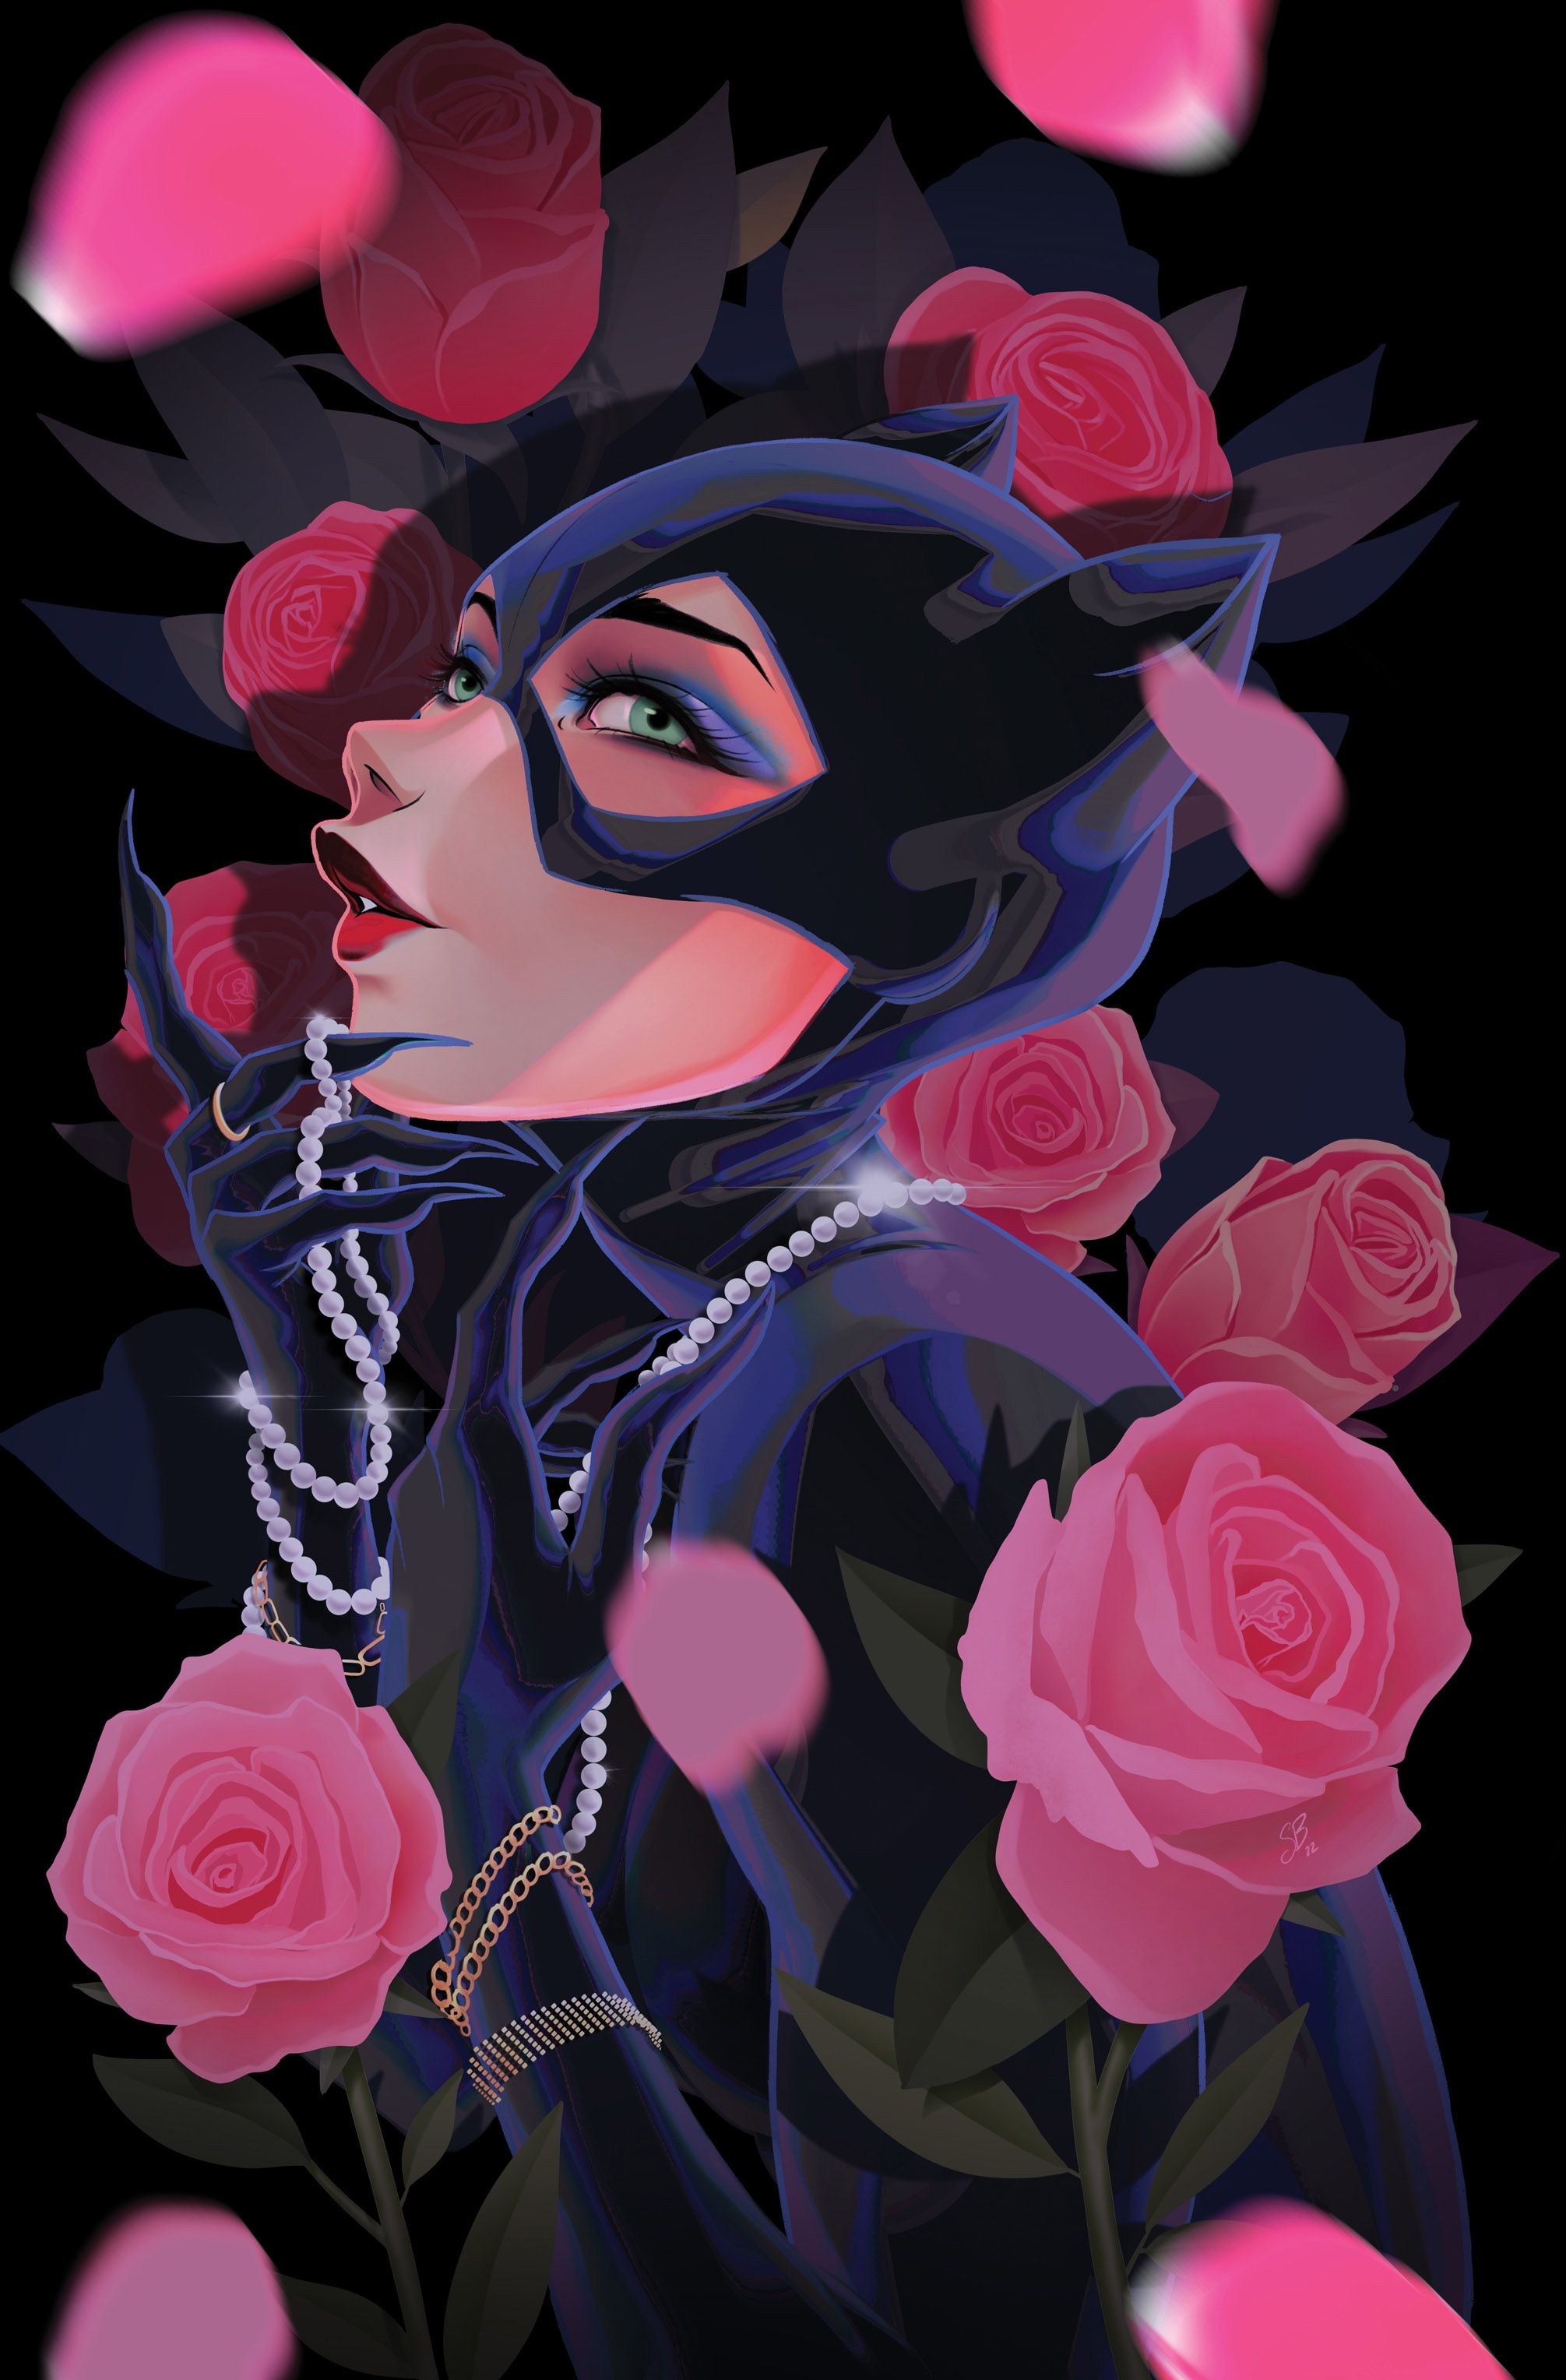 Catwoman 53 Open to Order Variant (Boo)